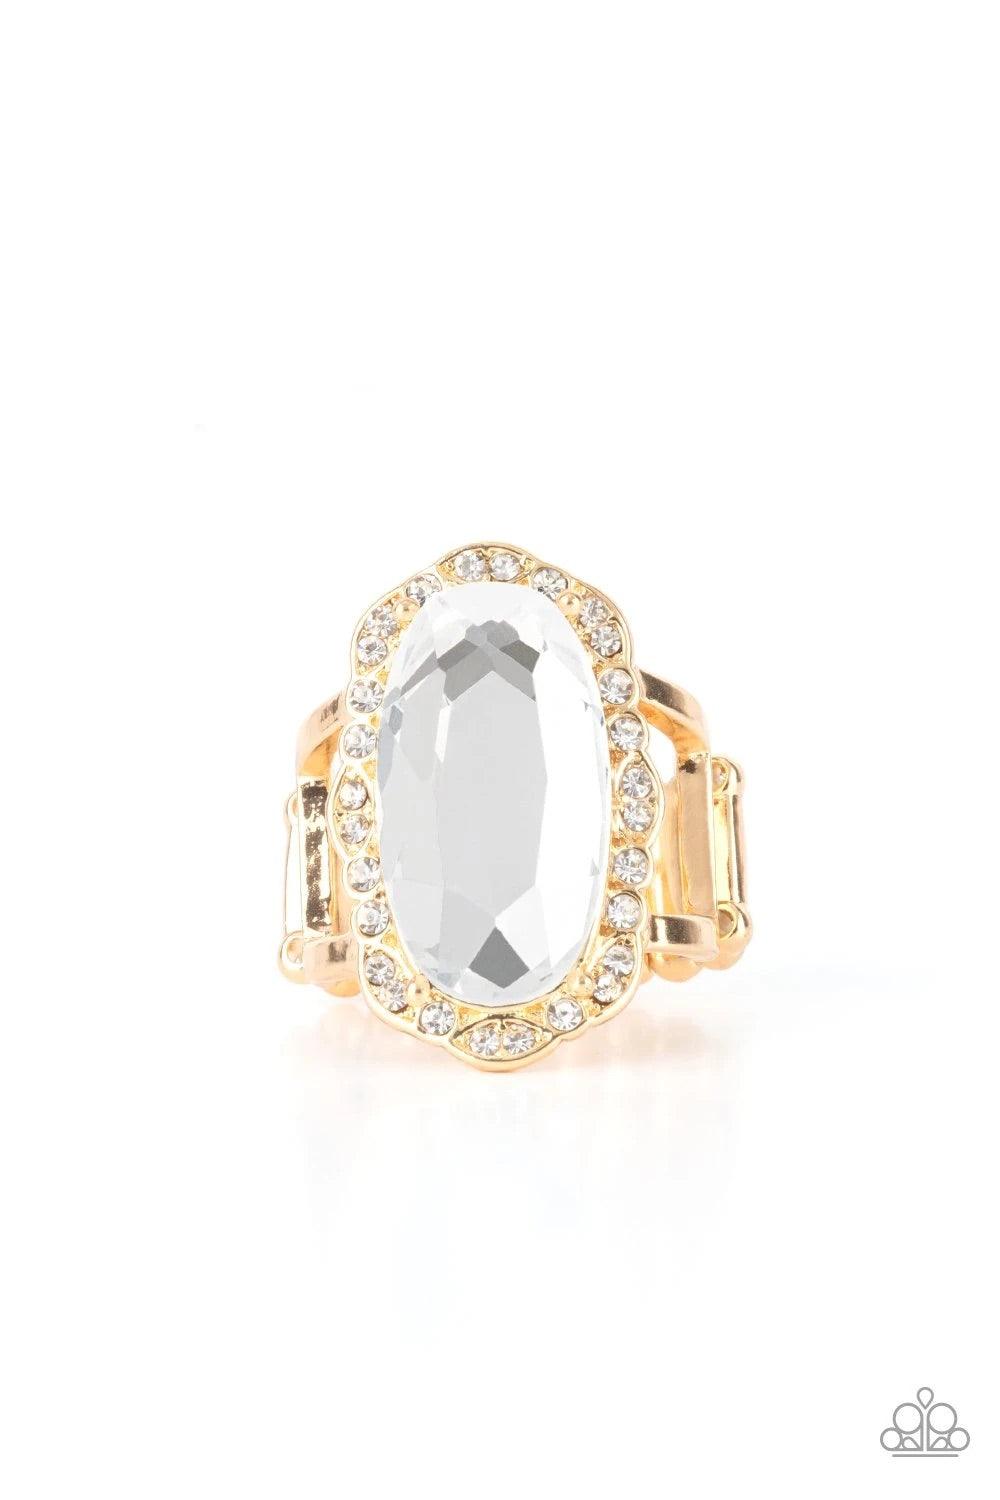 Paparazzi Accessories BLING to Heel! - Gold A dramatically oversized oval white gem adorns the center of a scalloped gold frame dusted in dainty white rhinestones, creating a commanding centerpiece atop the finger. Features a stretchy band for a flexible